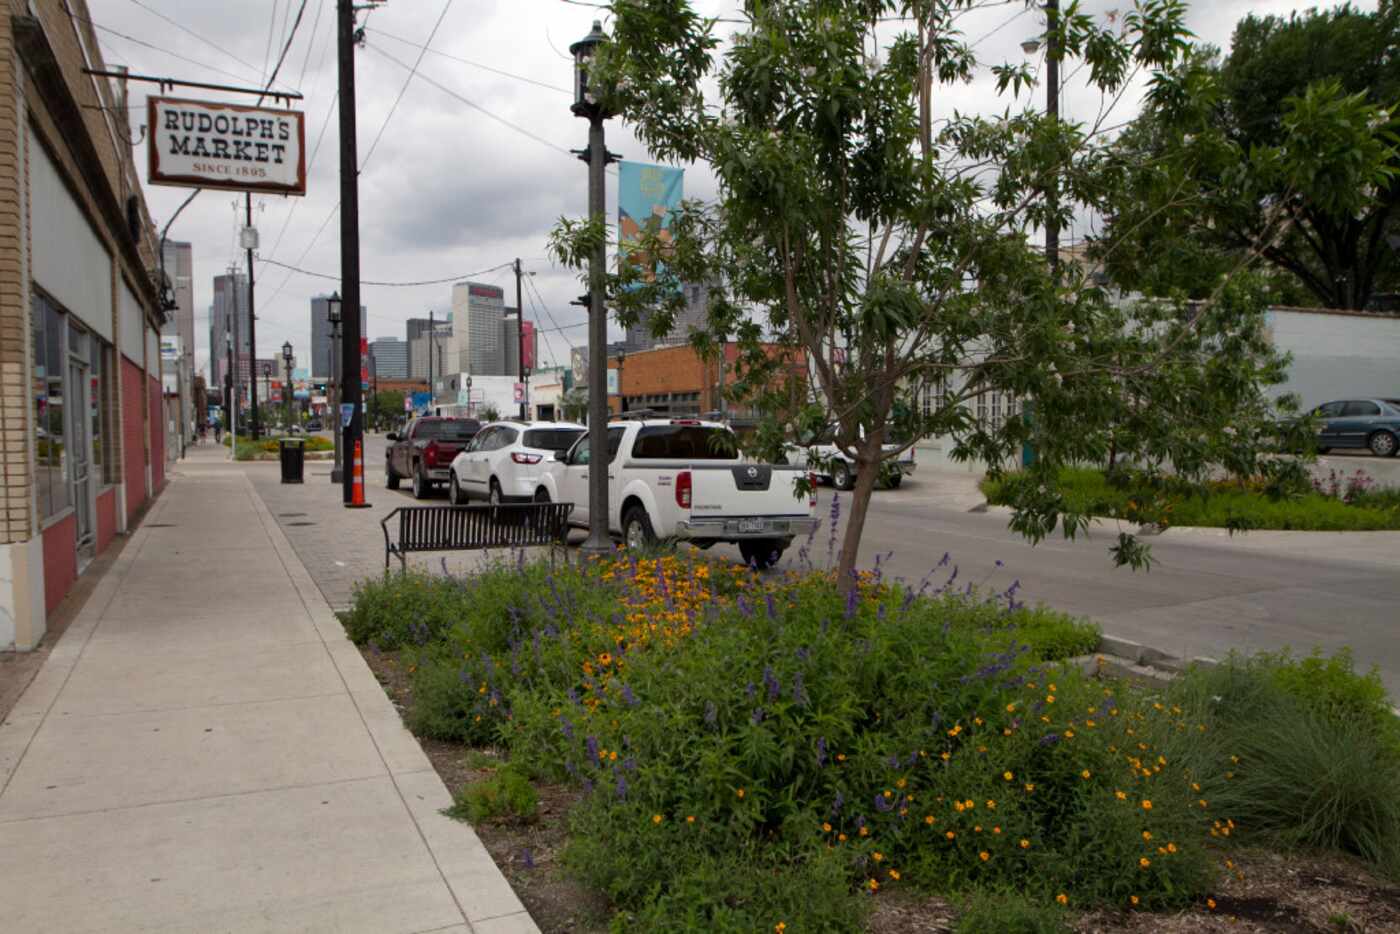 Deep Ellum looking west on Tuesday, with the "rain garden" in full bloom